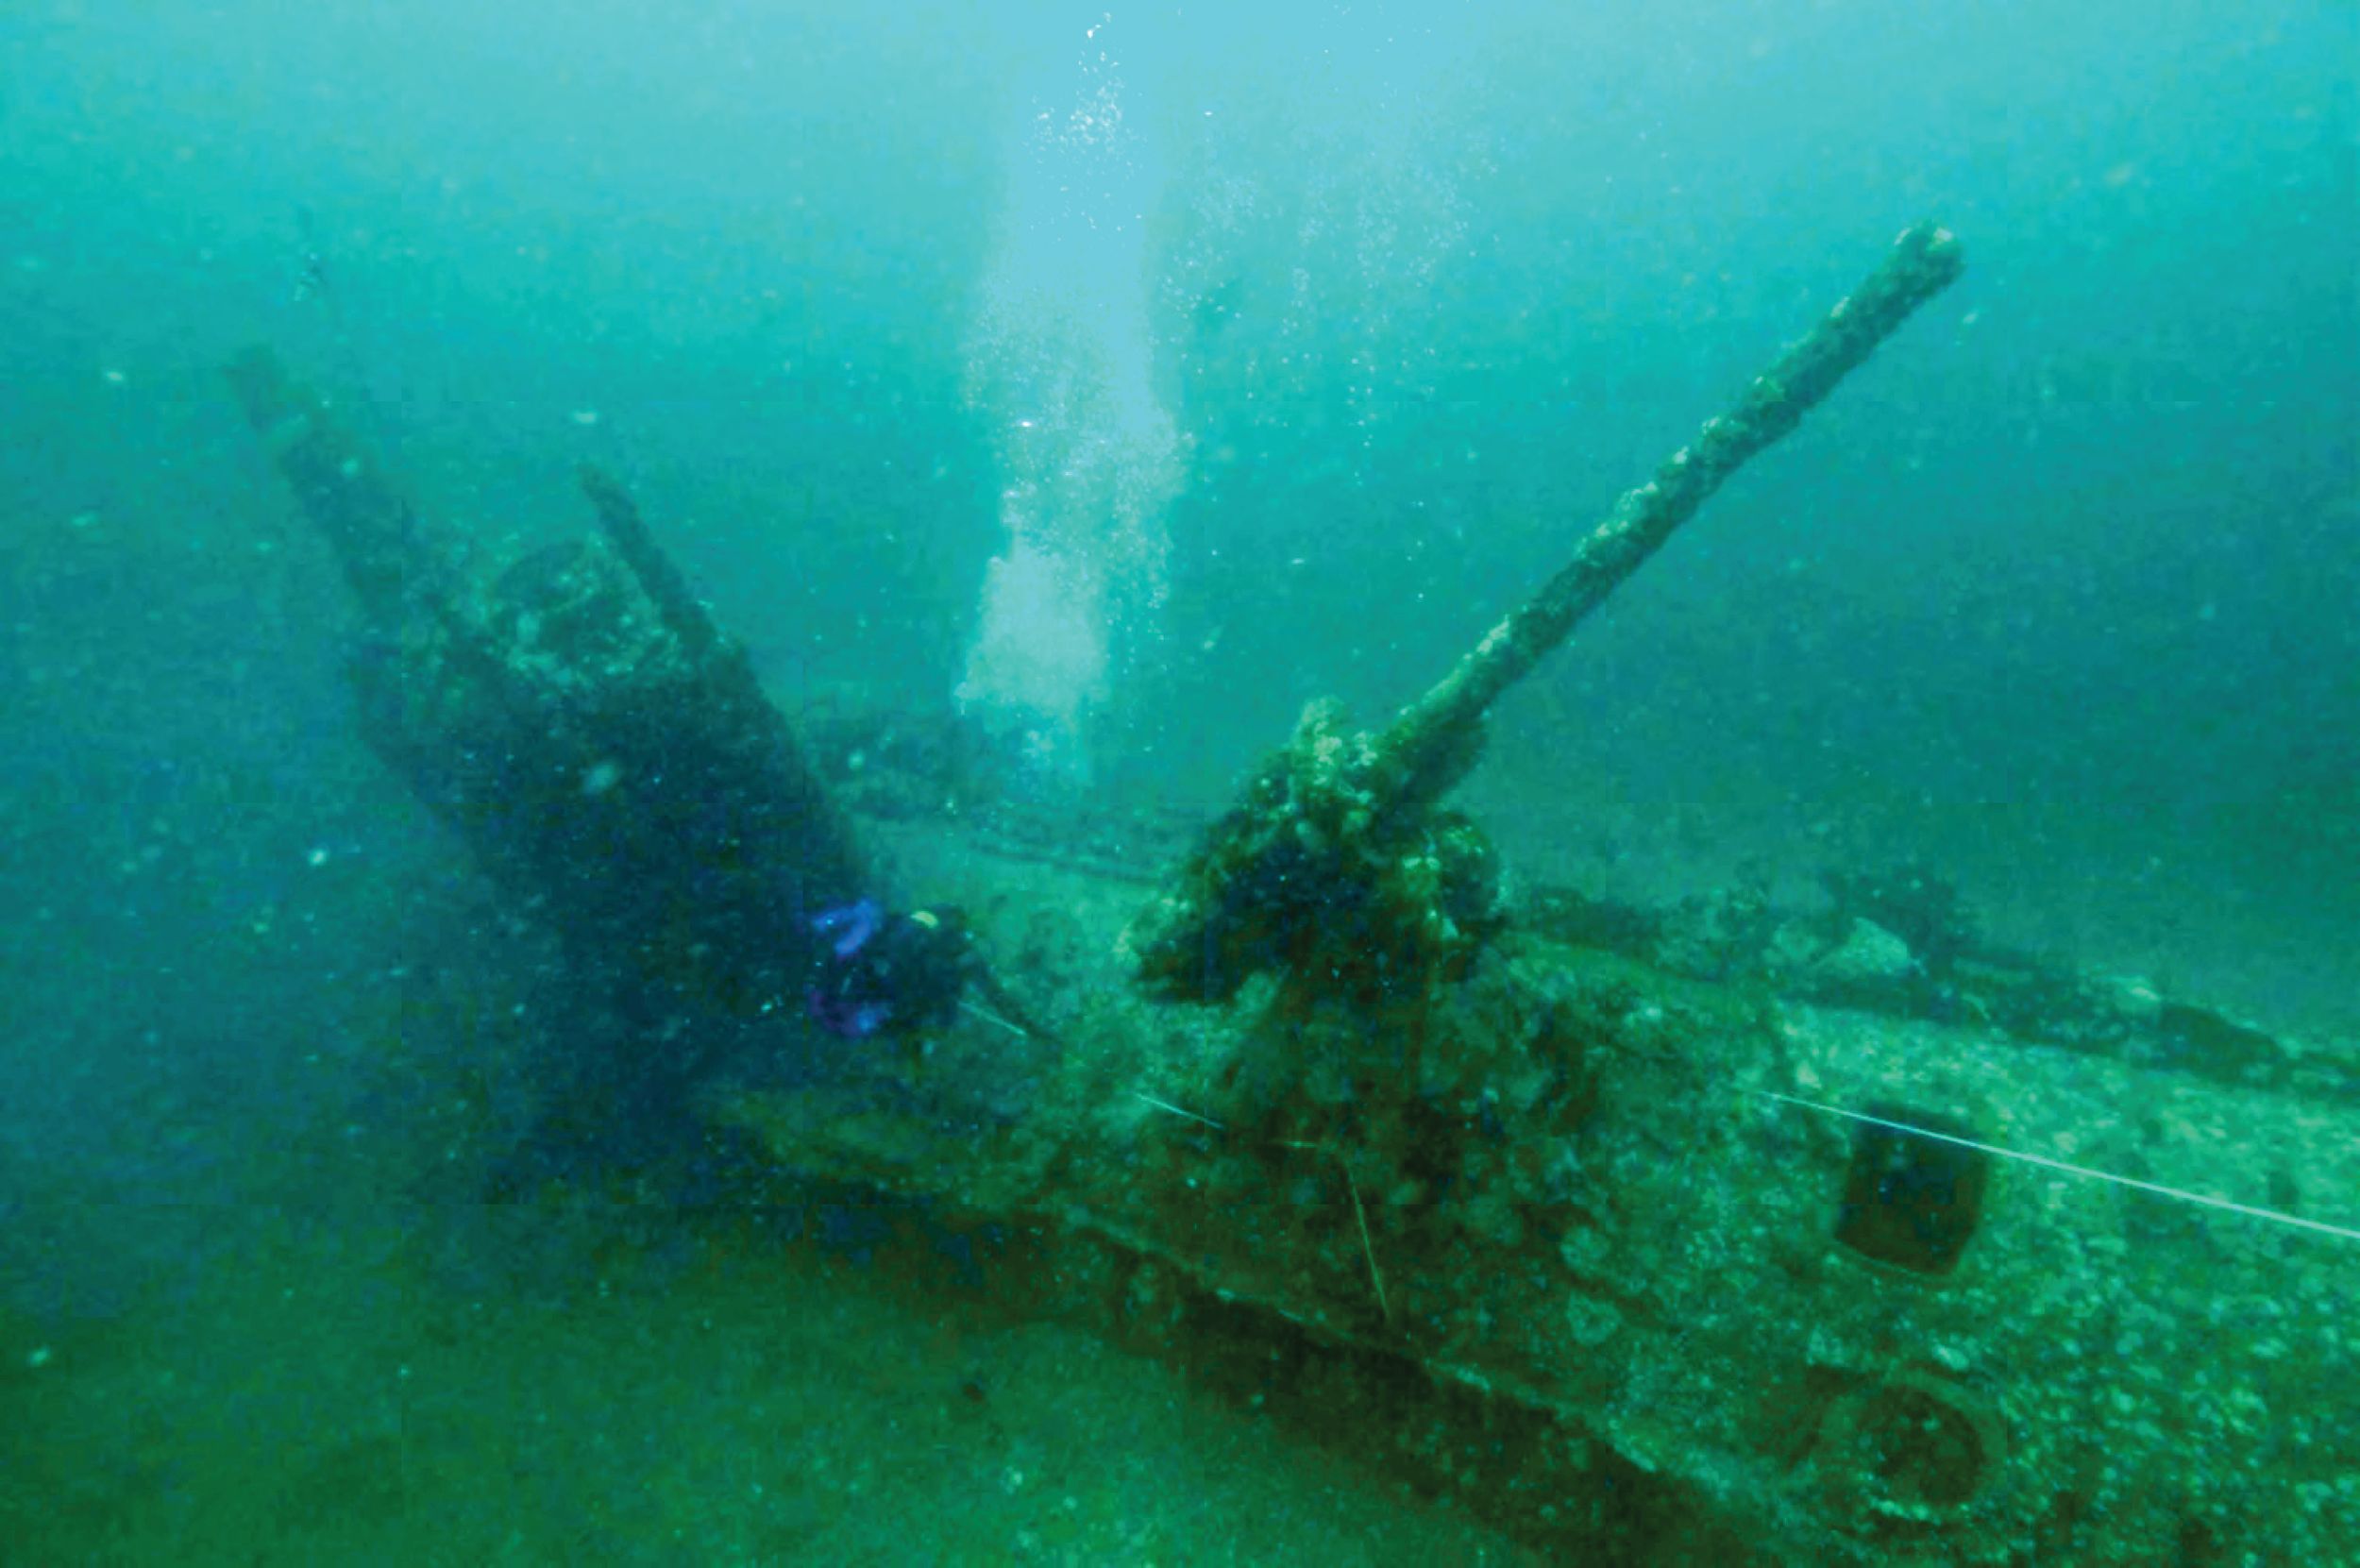 This photo mosaic shows the wreck of the German submarine U-85 off the coast of North Carolina, where it rests in 90 feet of water east of Oregon Inlet near Cape Hatteras. A Type VIIB submarine, U-85 was the first German submarine to be sunk by the U.S. Navy off the East Coast of the United States during World War II.